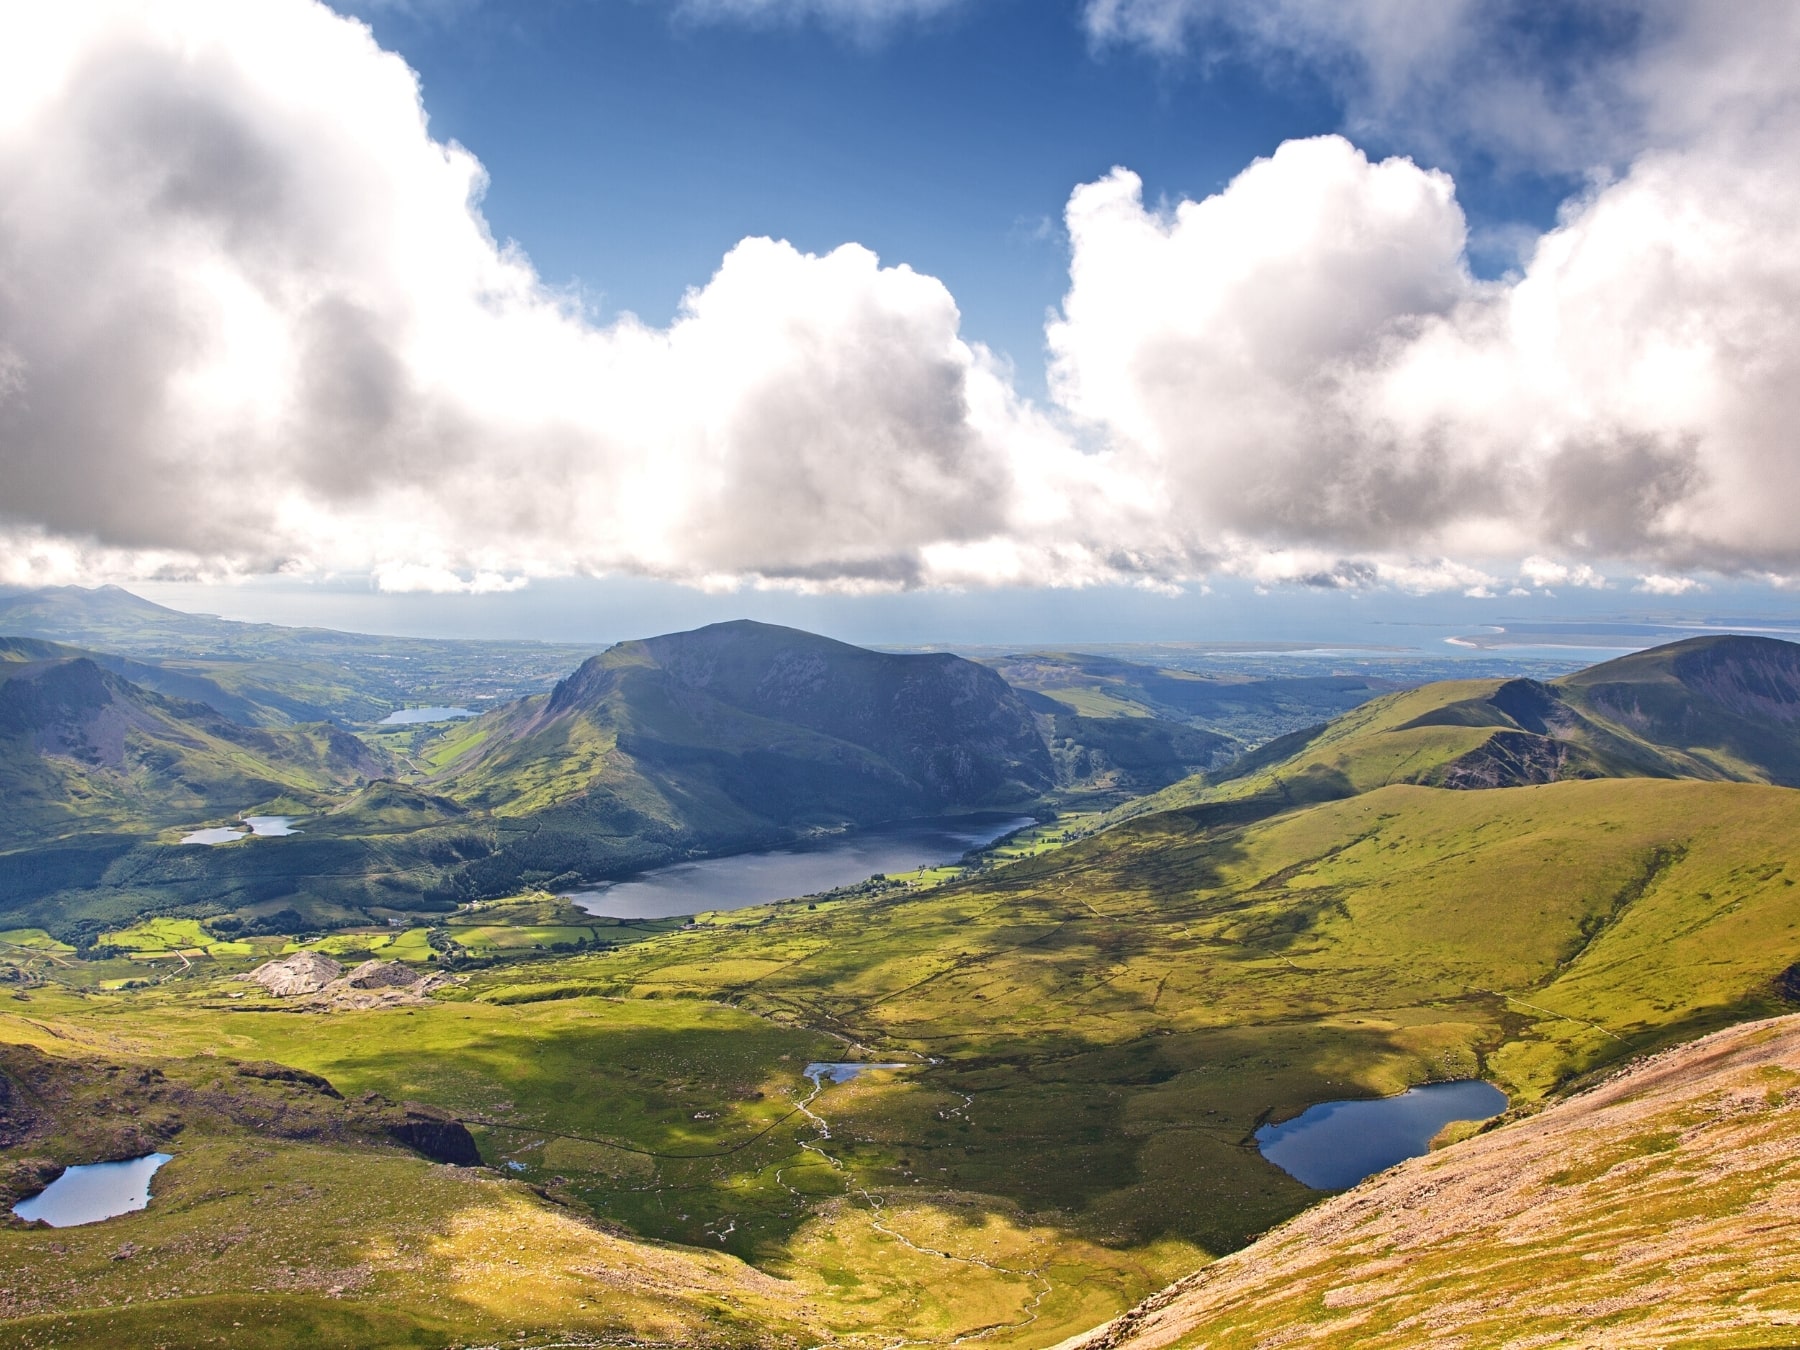 Snowdonia Adventure - Tryfan, the Glyders and Snowdon maybe...